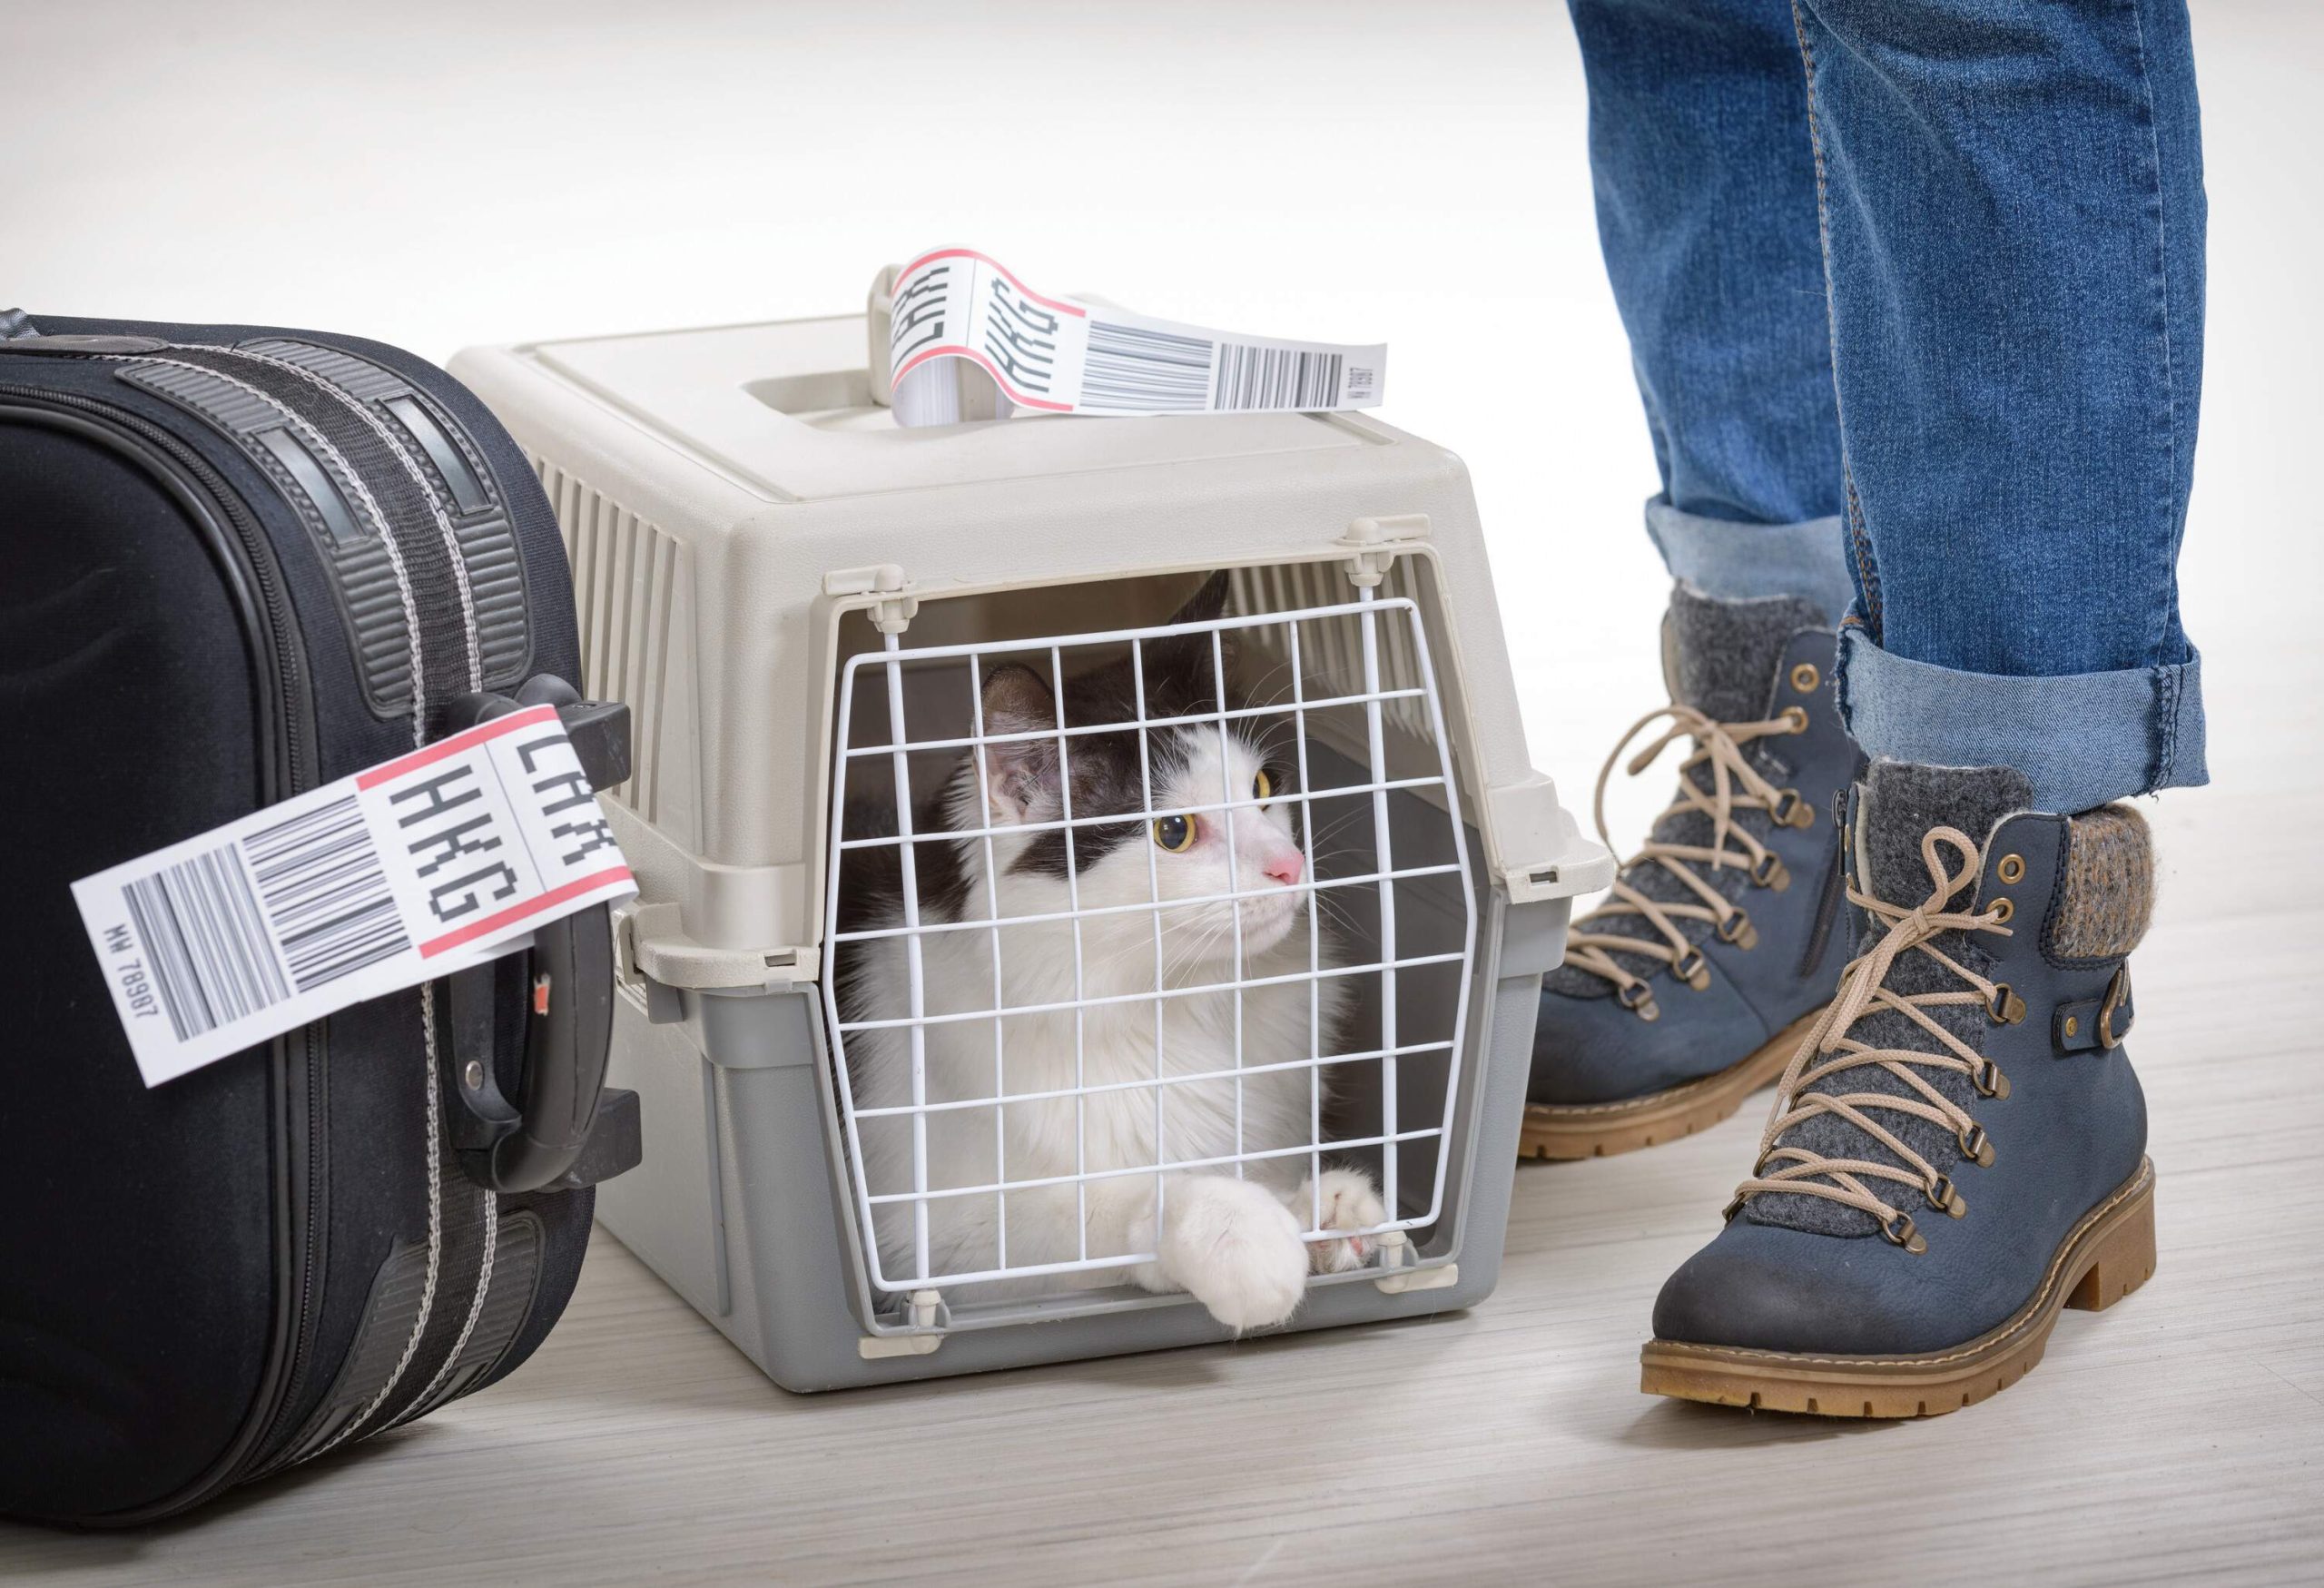 A black and white cat inside a cage between a tagged luggage and a person's boots.